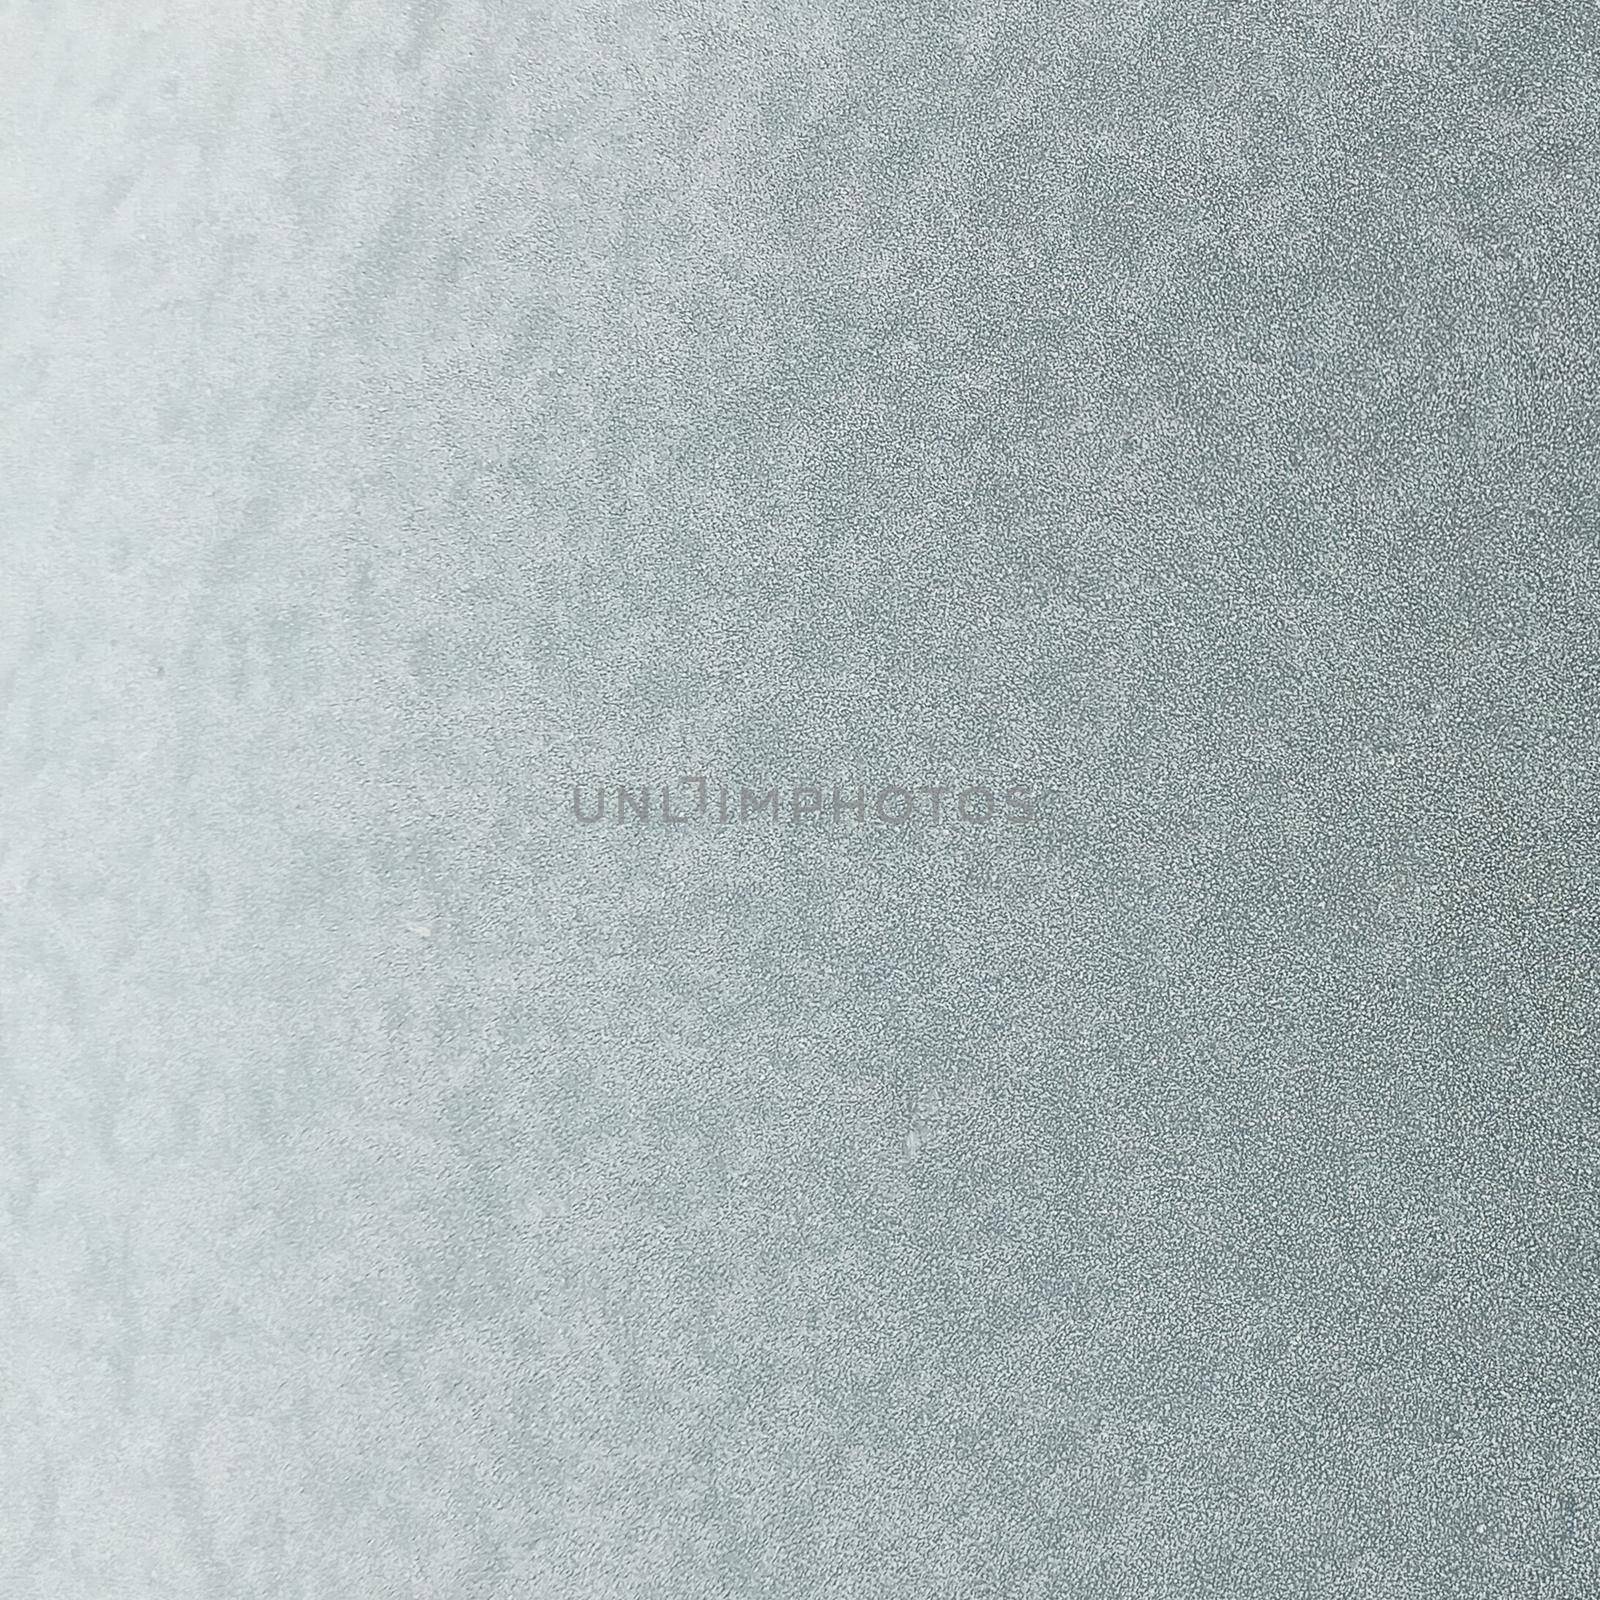 The frozen hood of the car. Frost on the metal surface of the car with a gray blur effect. Abstract background and texture for design.